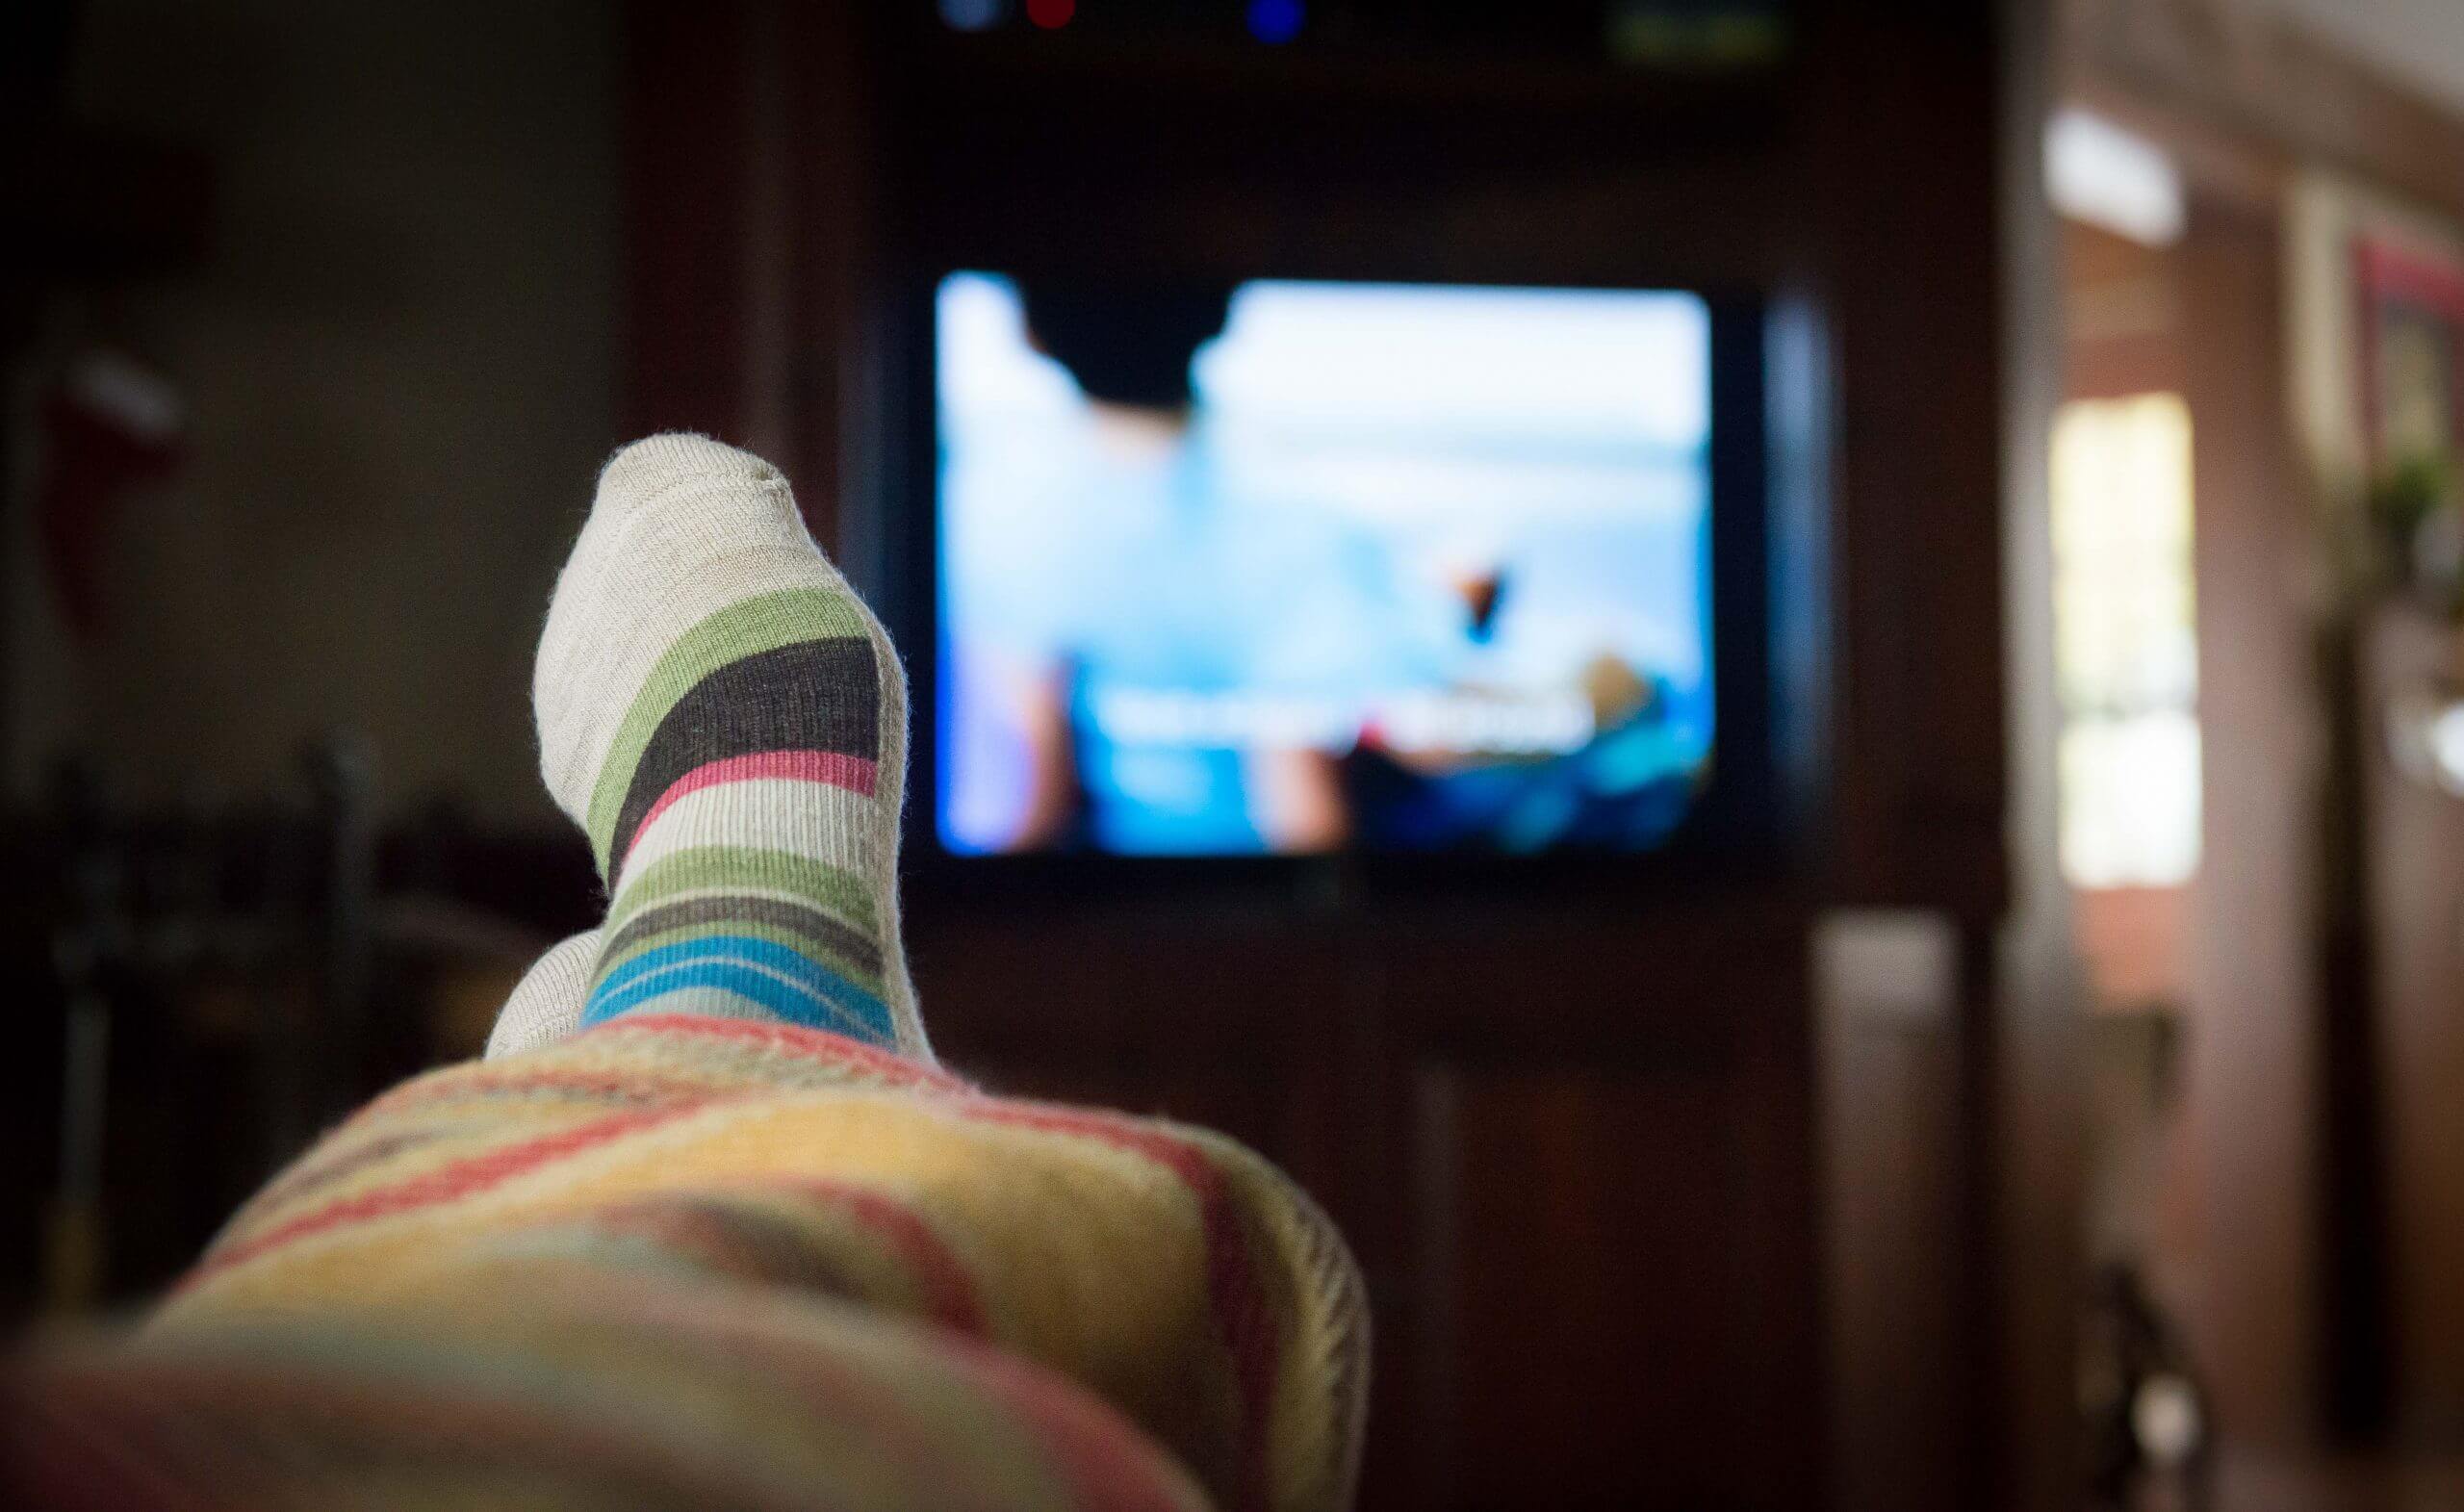 A focused view of a person's feet up with an unfocused view of a television screen.